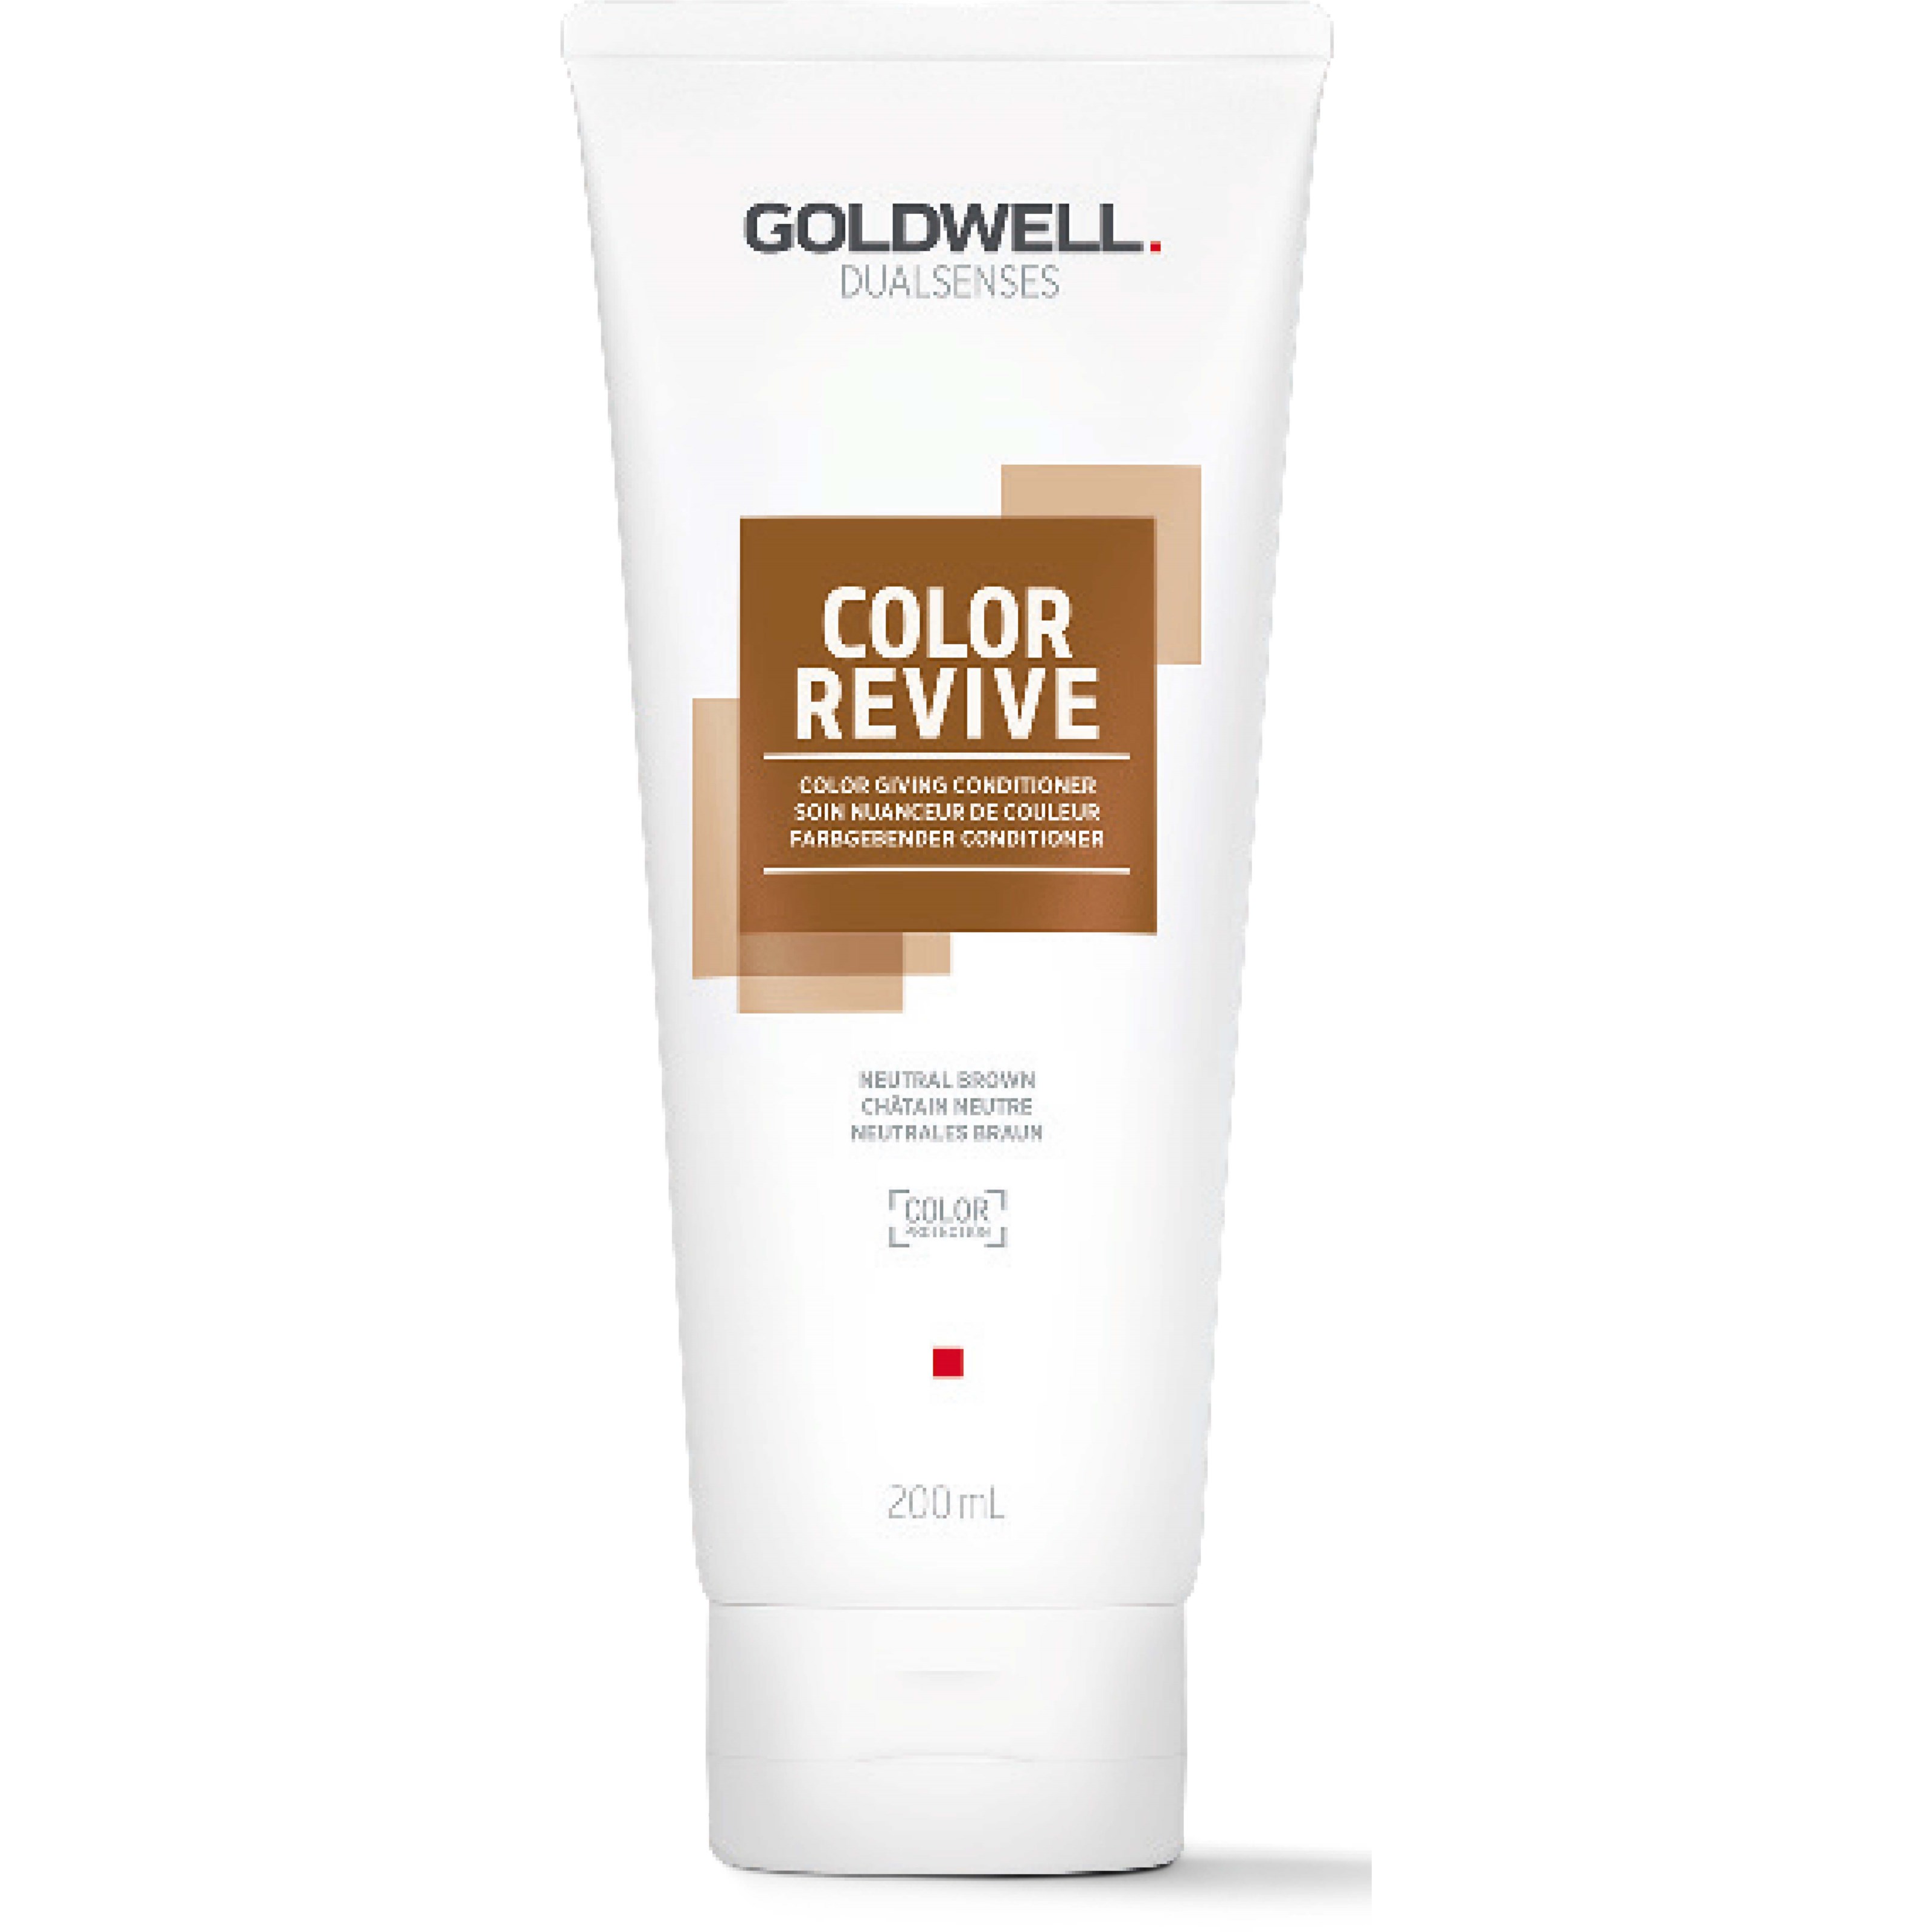 Läs mer om Goldwell Dualsenses Color Revive Color Giving Conditioner Neutral Brow